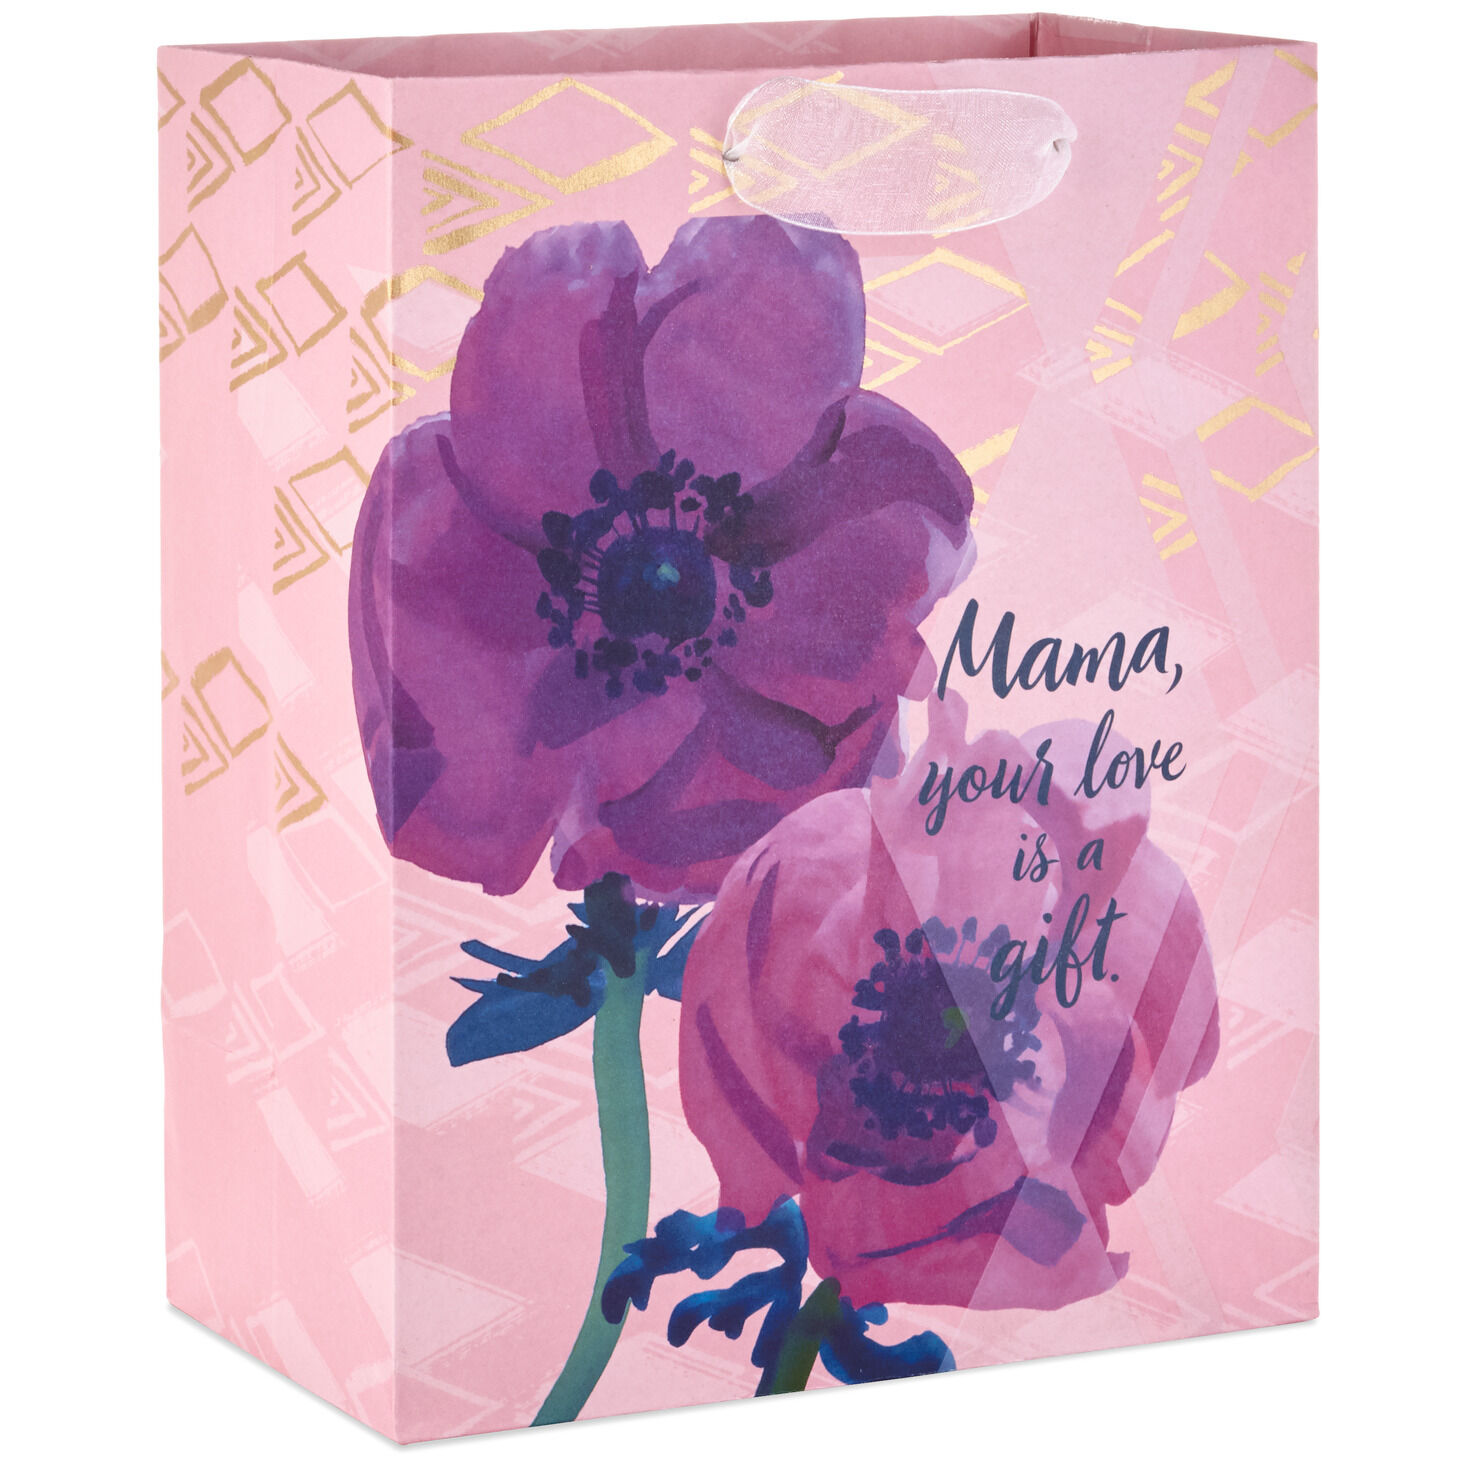 5 Paper Gift Bags PURPLE WHITE RED or WINTER LANDSCAPE You Pick